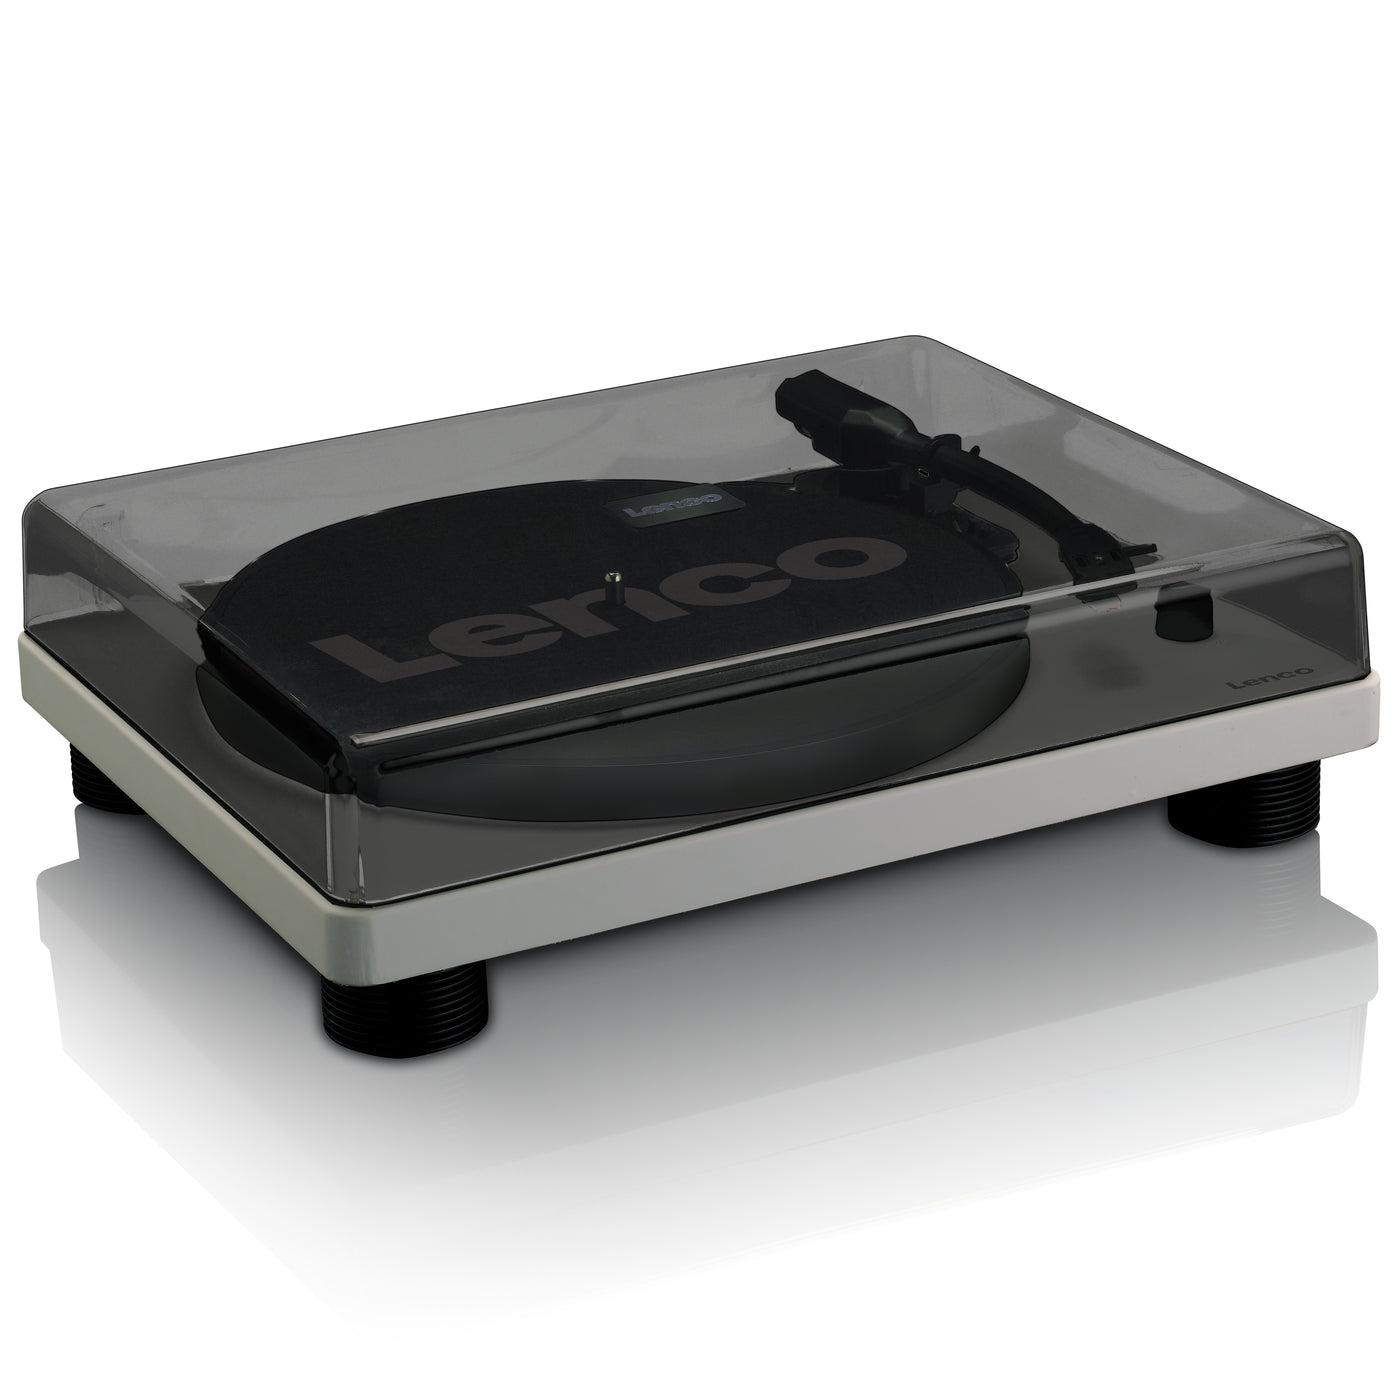 LENCO LS-50GY - Record Player with built-in speakers USB Encoding - Grey